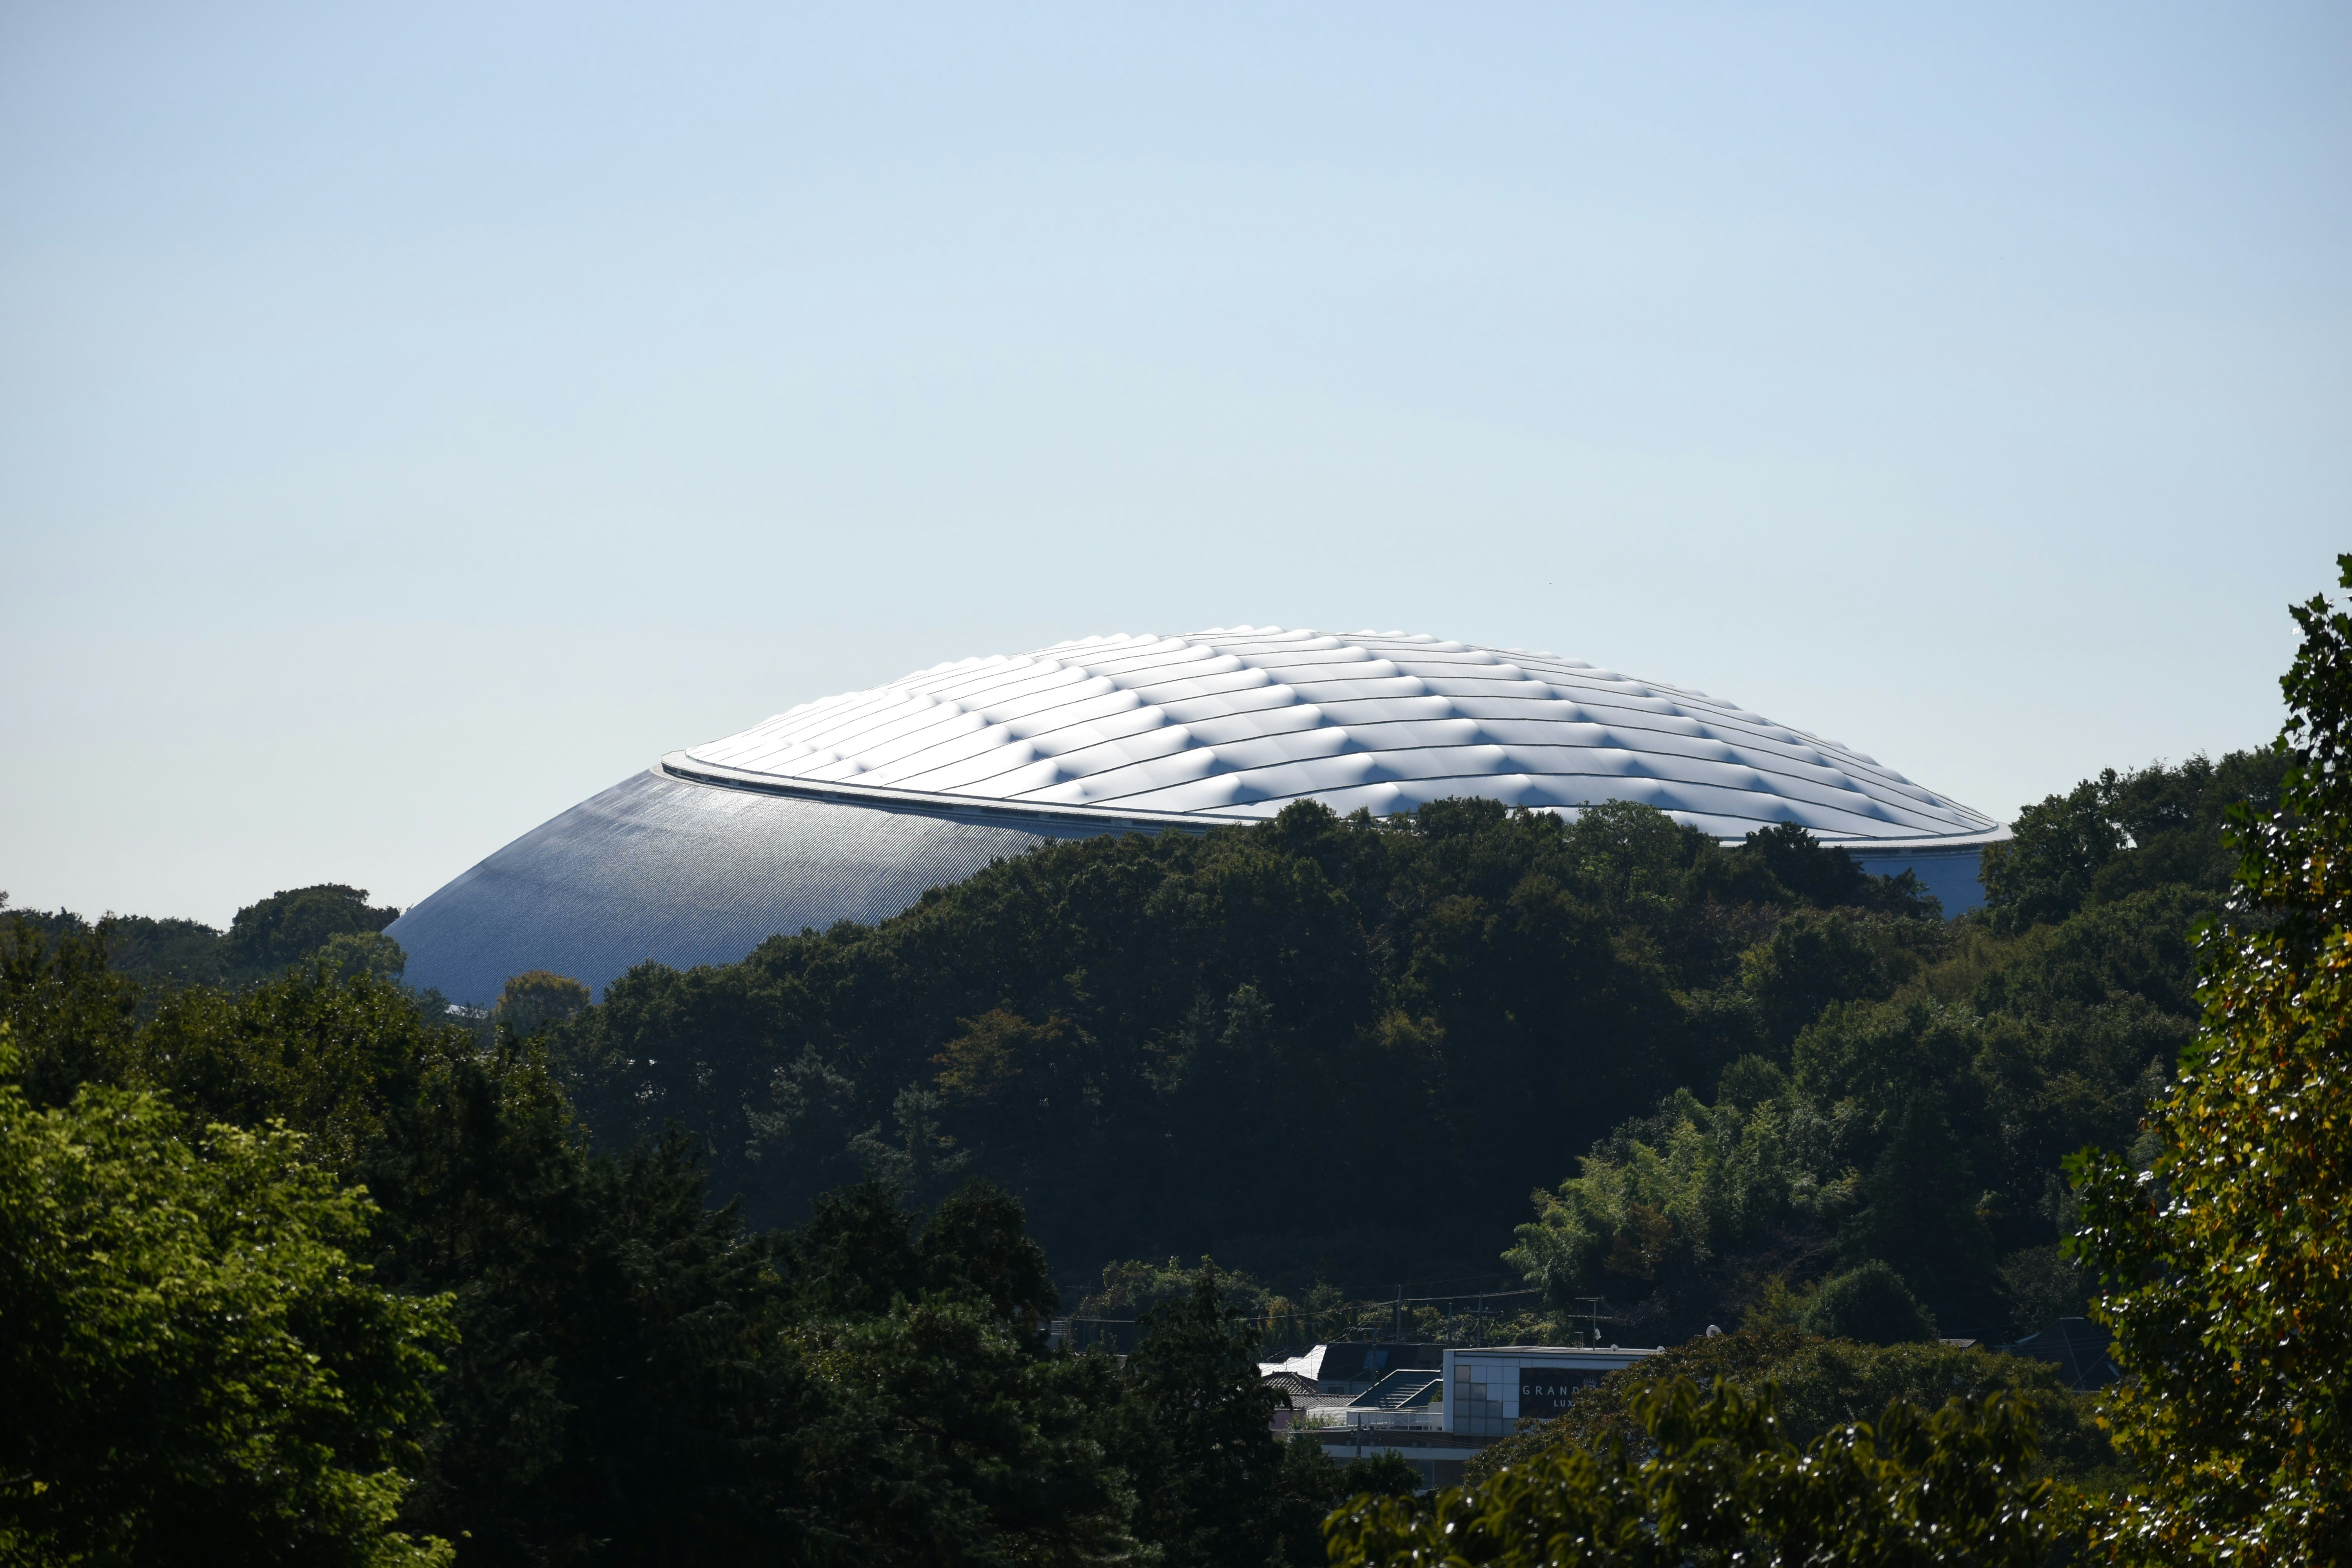 A view of the Seibu Dome over the treetops in Tokorozawa